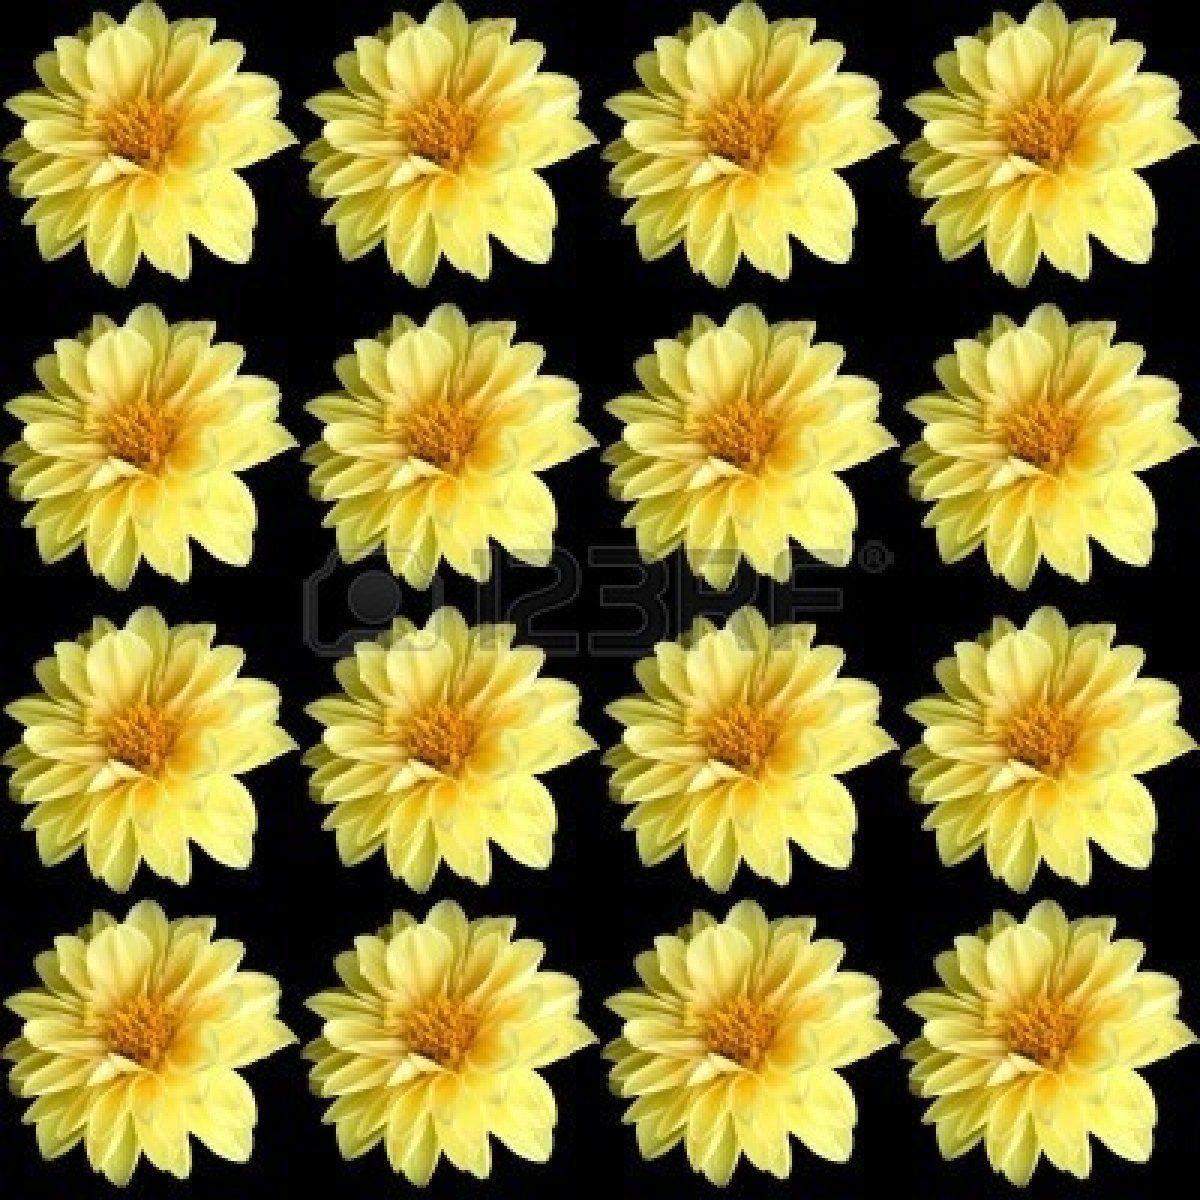 solid black background A Background Of Bright Yellow Dahlia Blooms